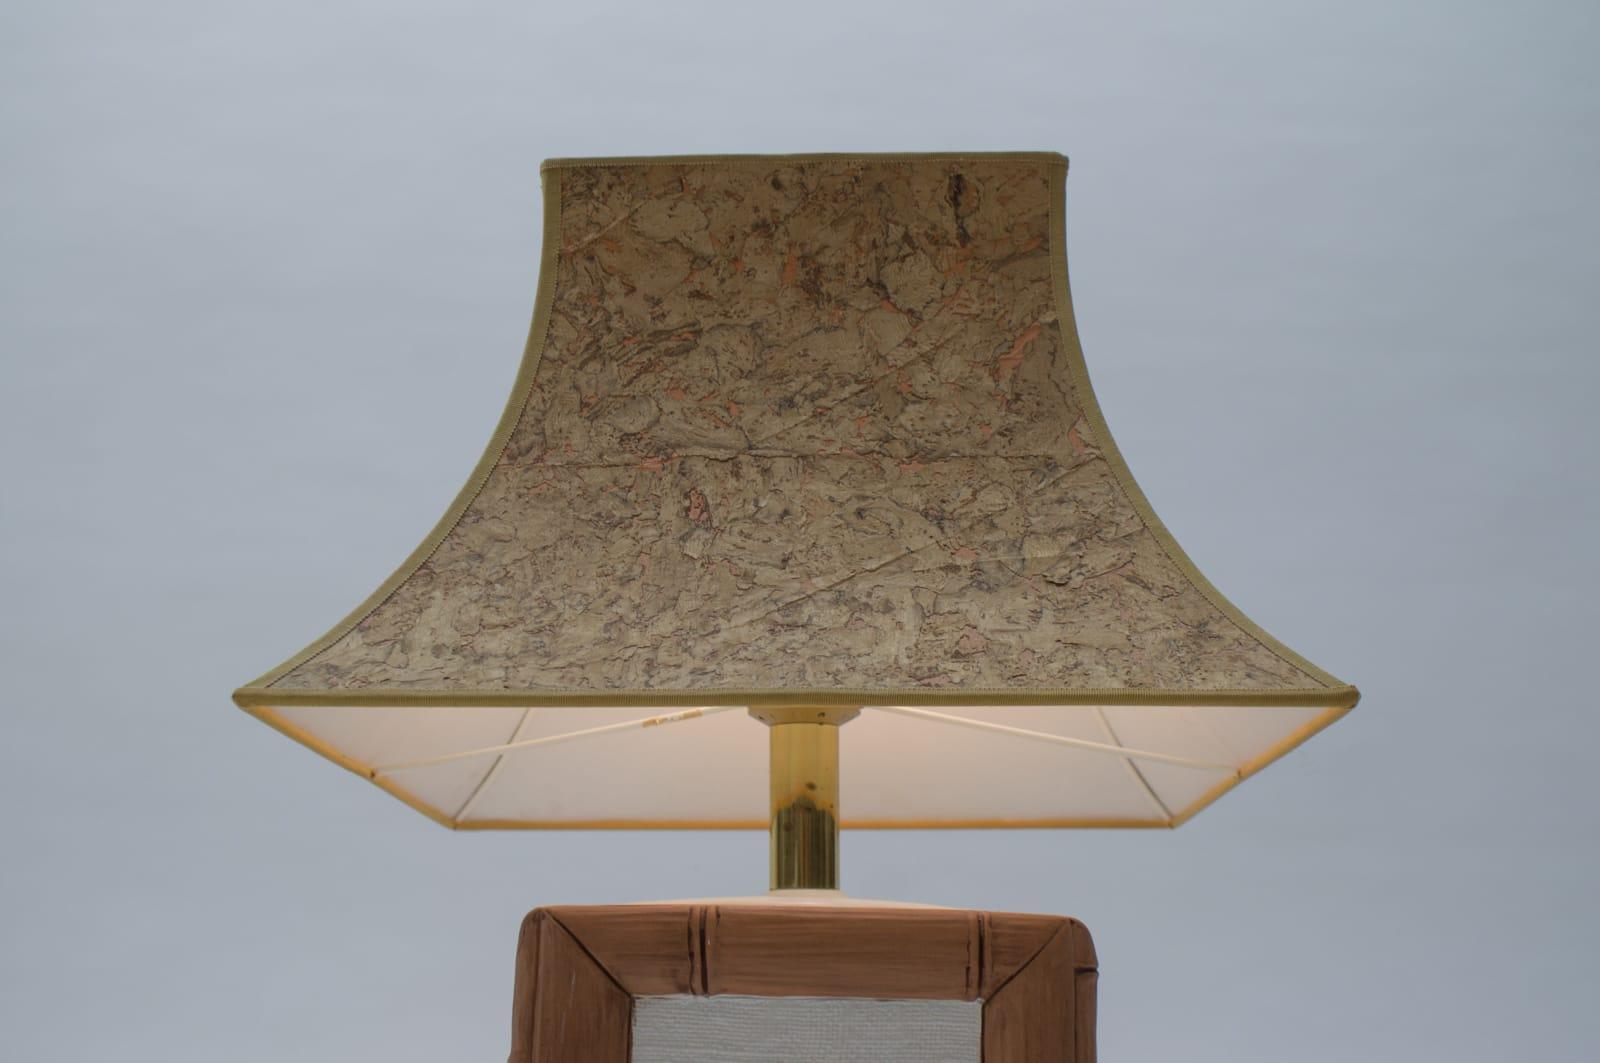 Ceramic Table Lamp with Cork Shade in Japan Bamboo Look by Leola, 1970s, Germany For Sale 2